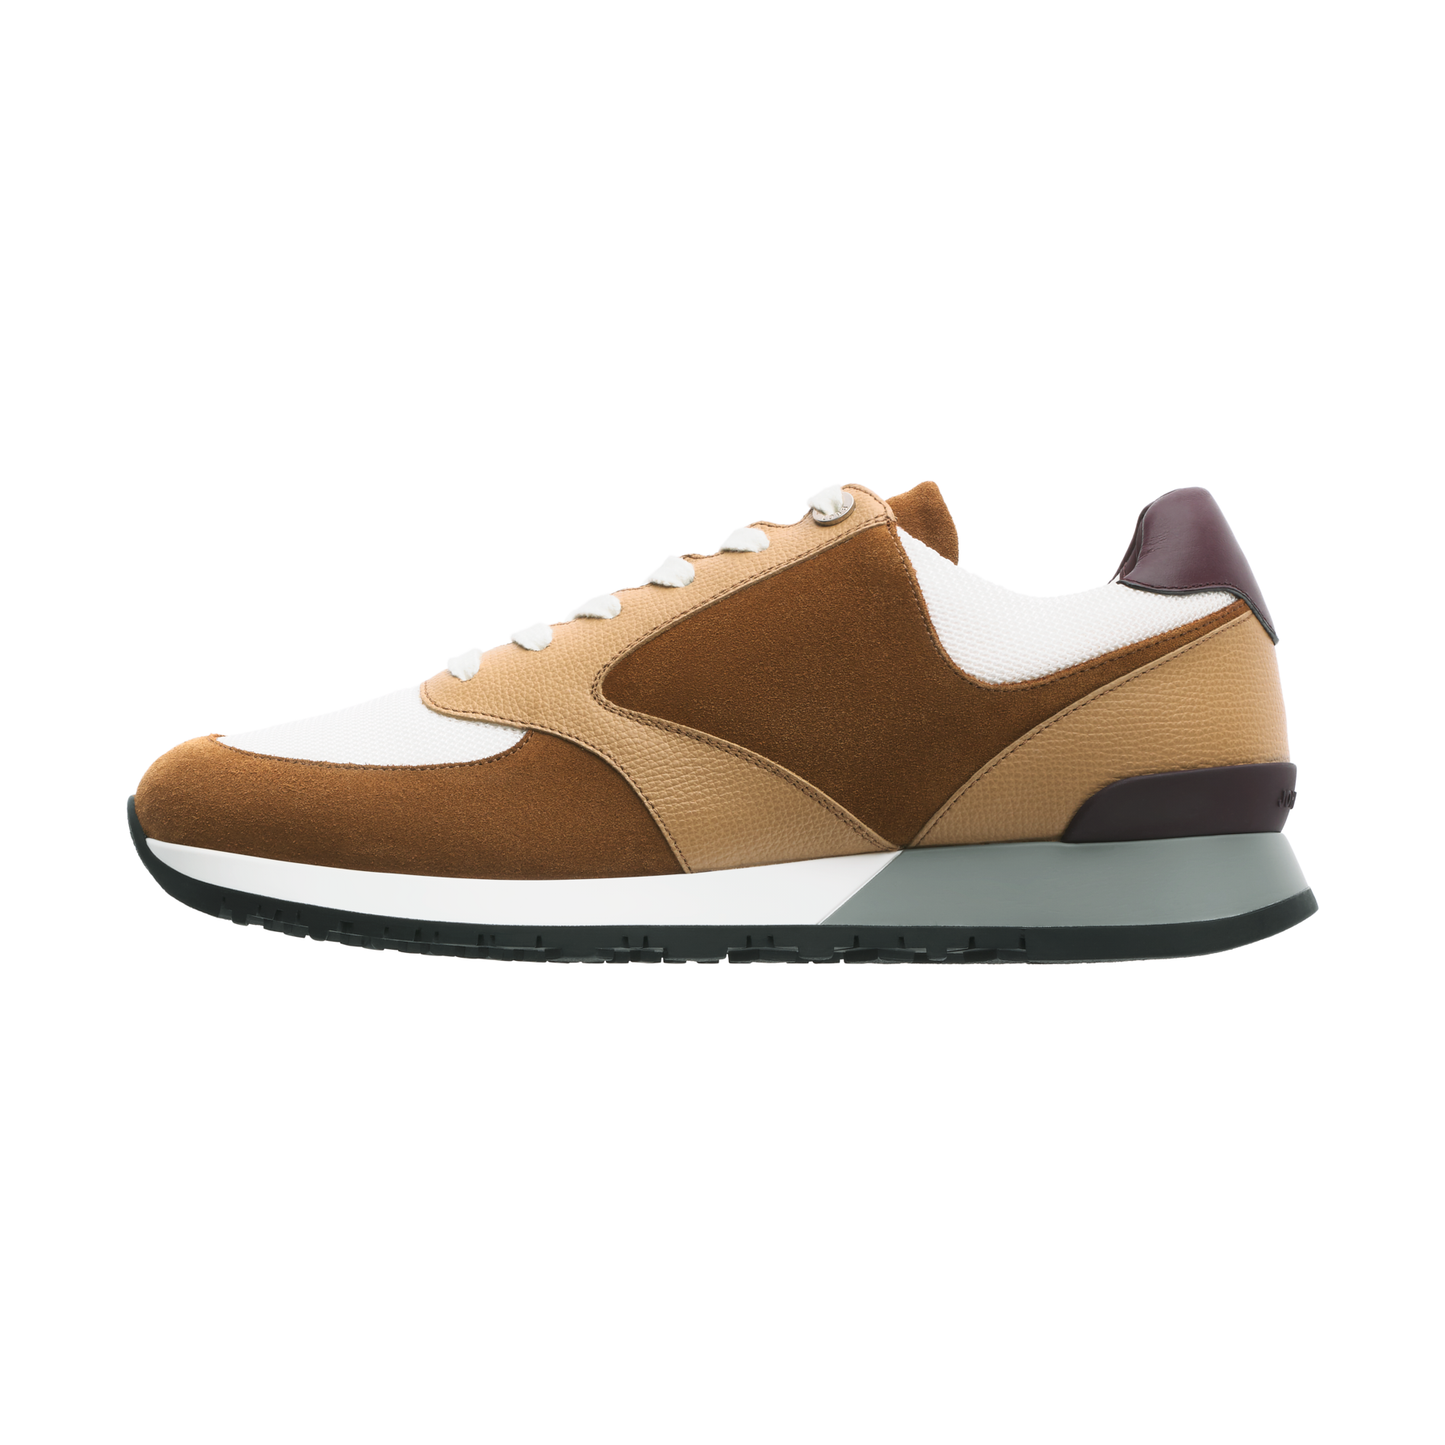 John Lobb "Foundry" Suede and Leather Sneakers in Taupe - SARTALE